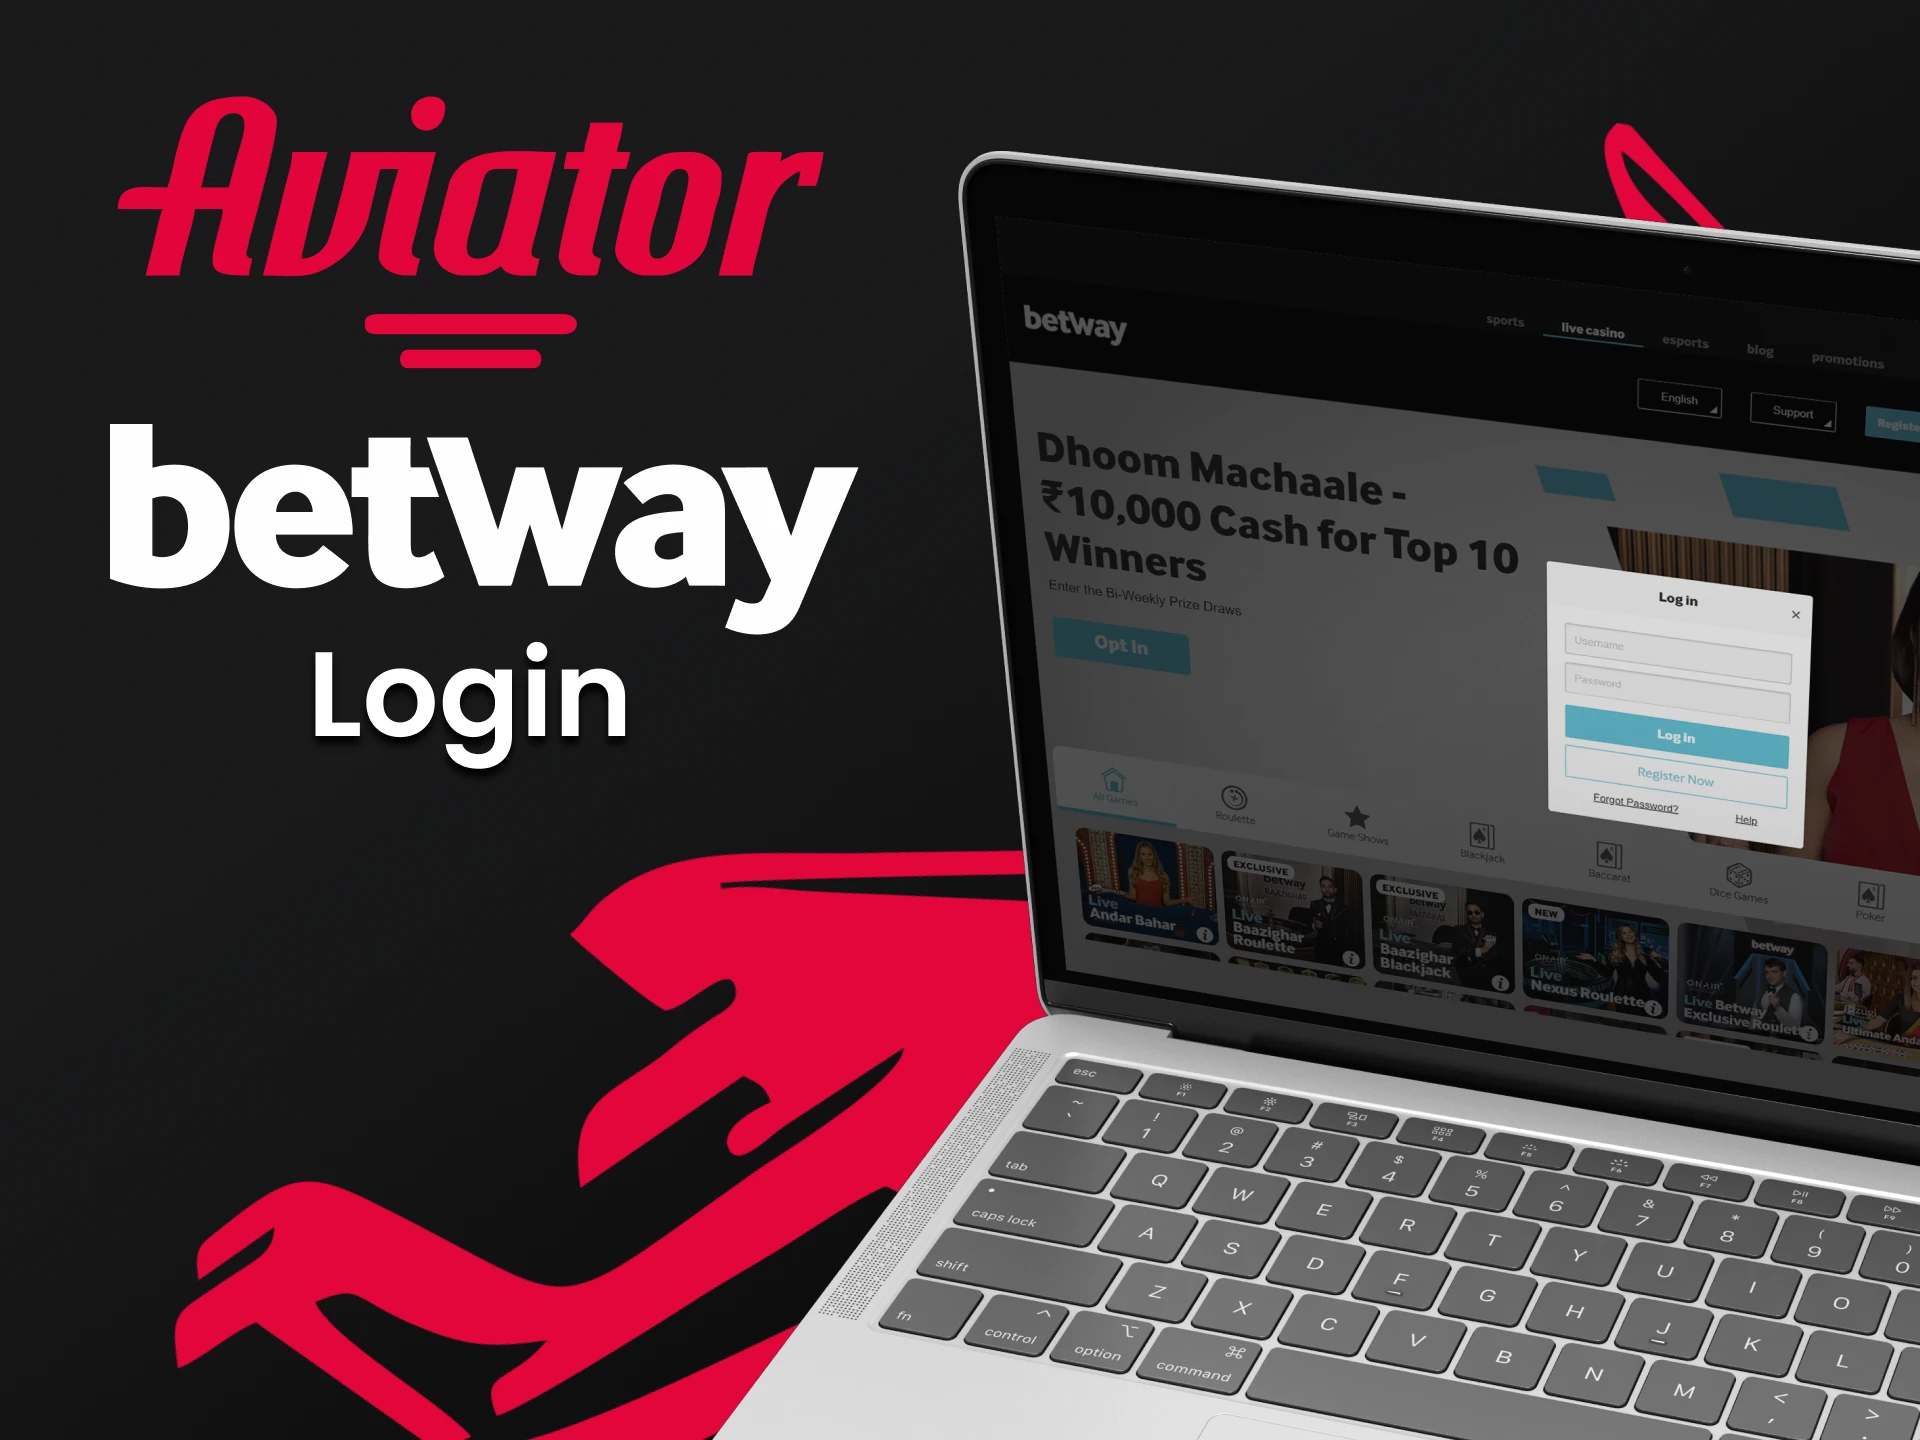 Sign in to your Betway account to play Aviator.